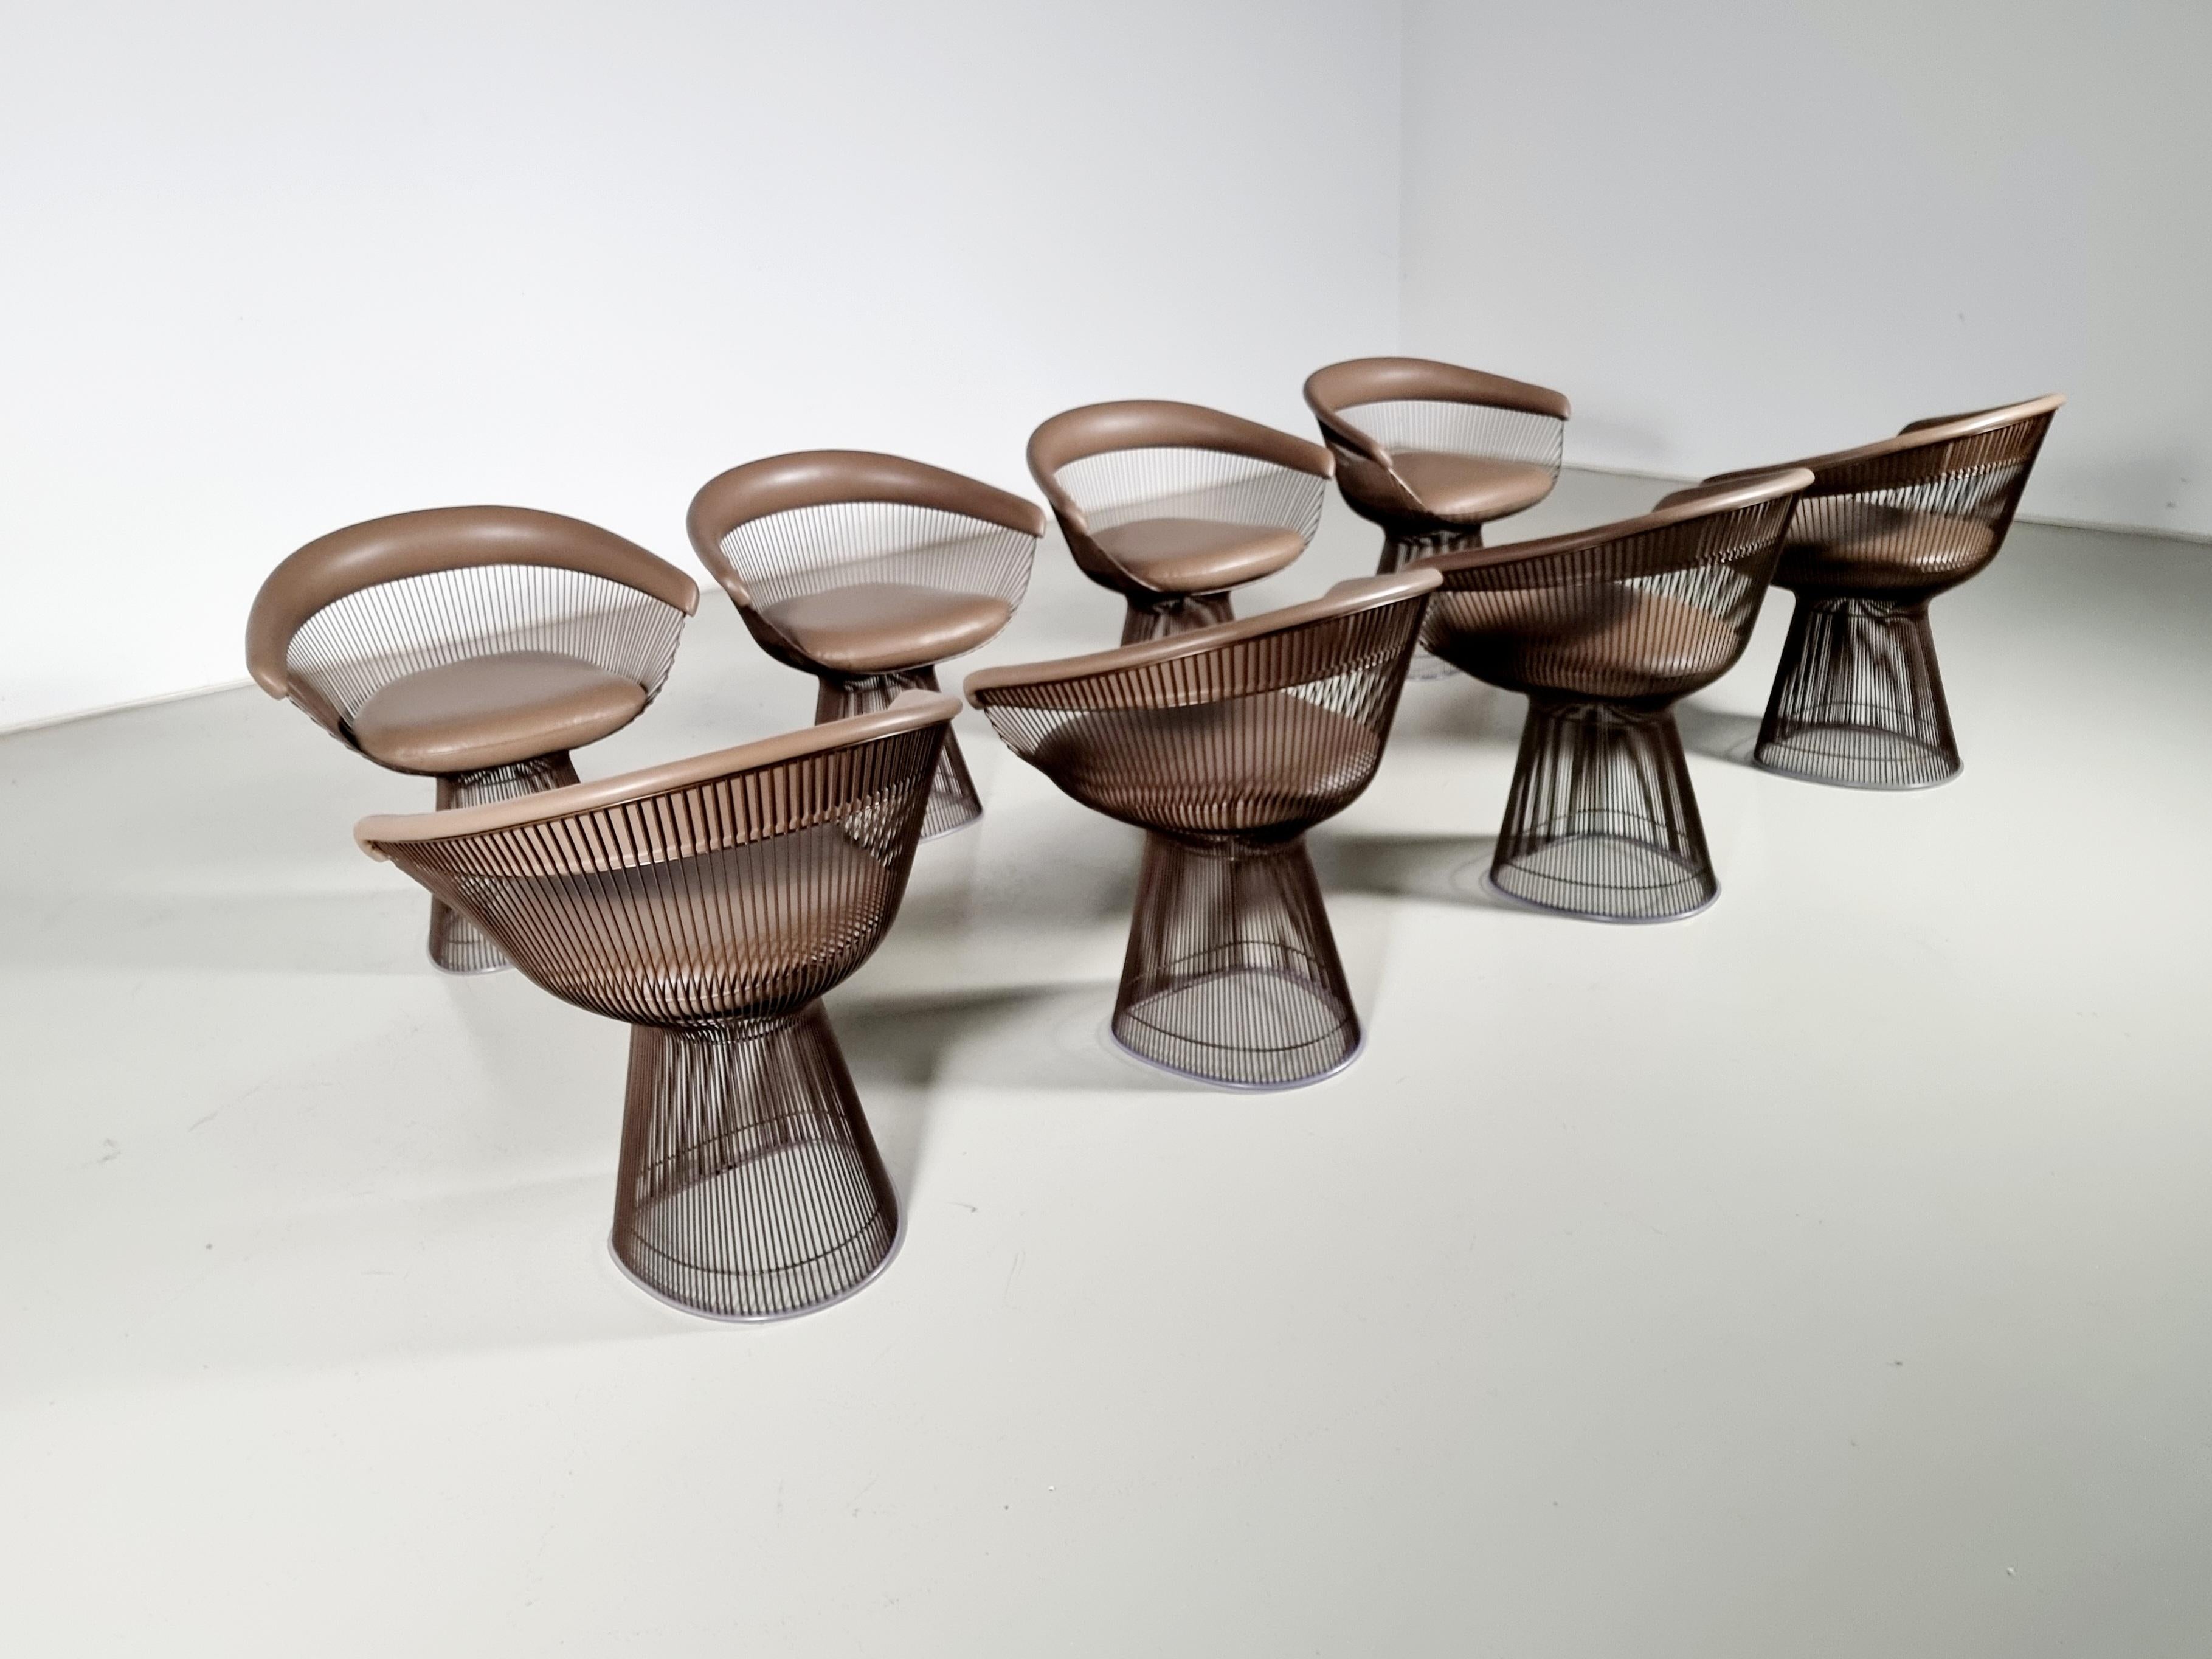 European Warren Platner dining chairs in bronze and leather, Knoll International